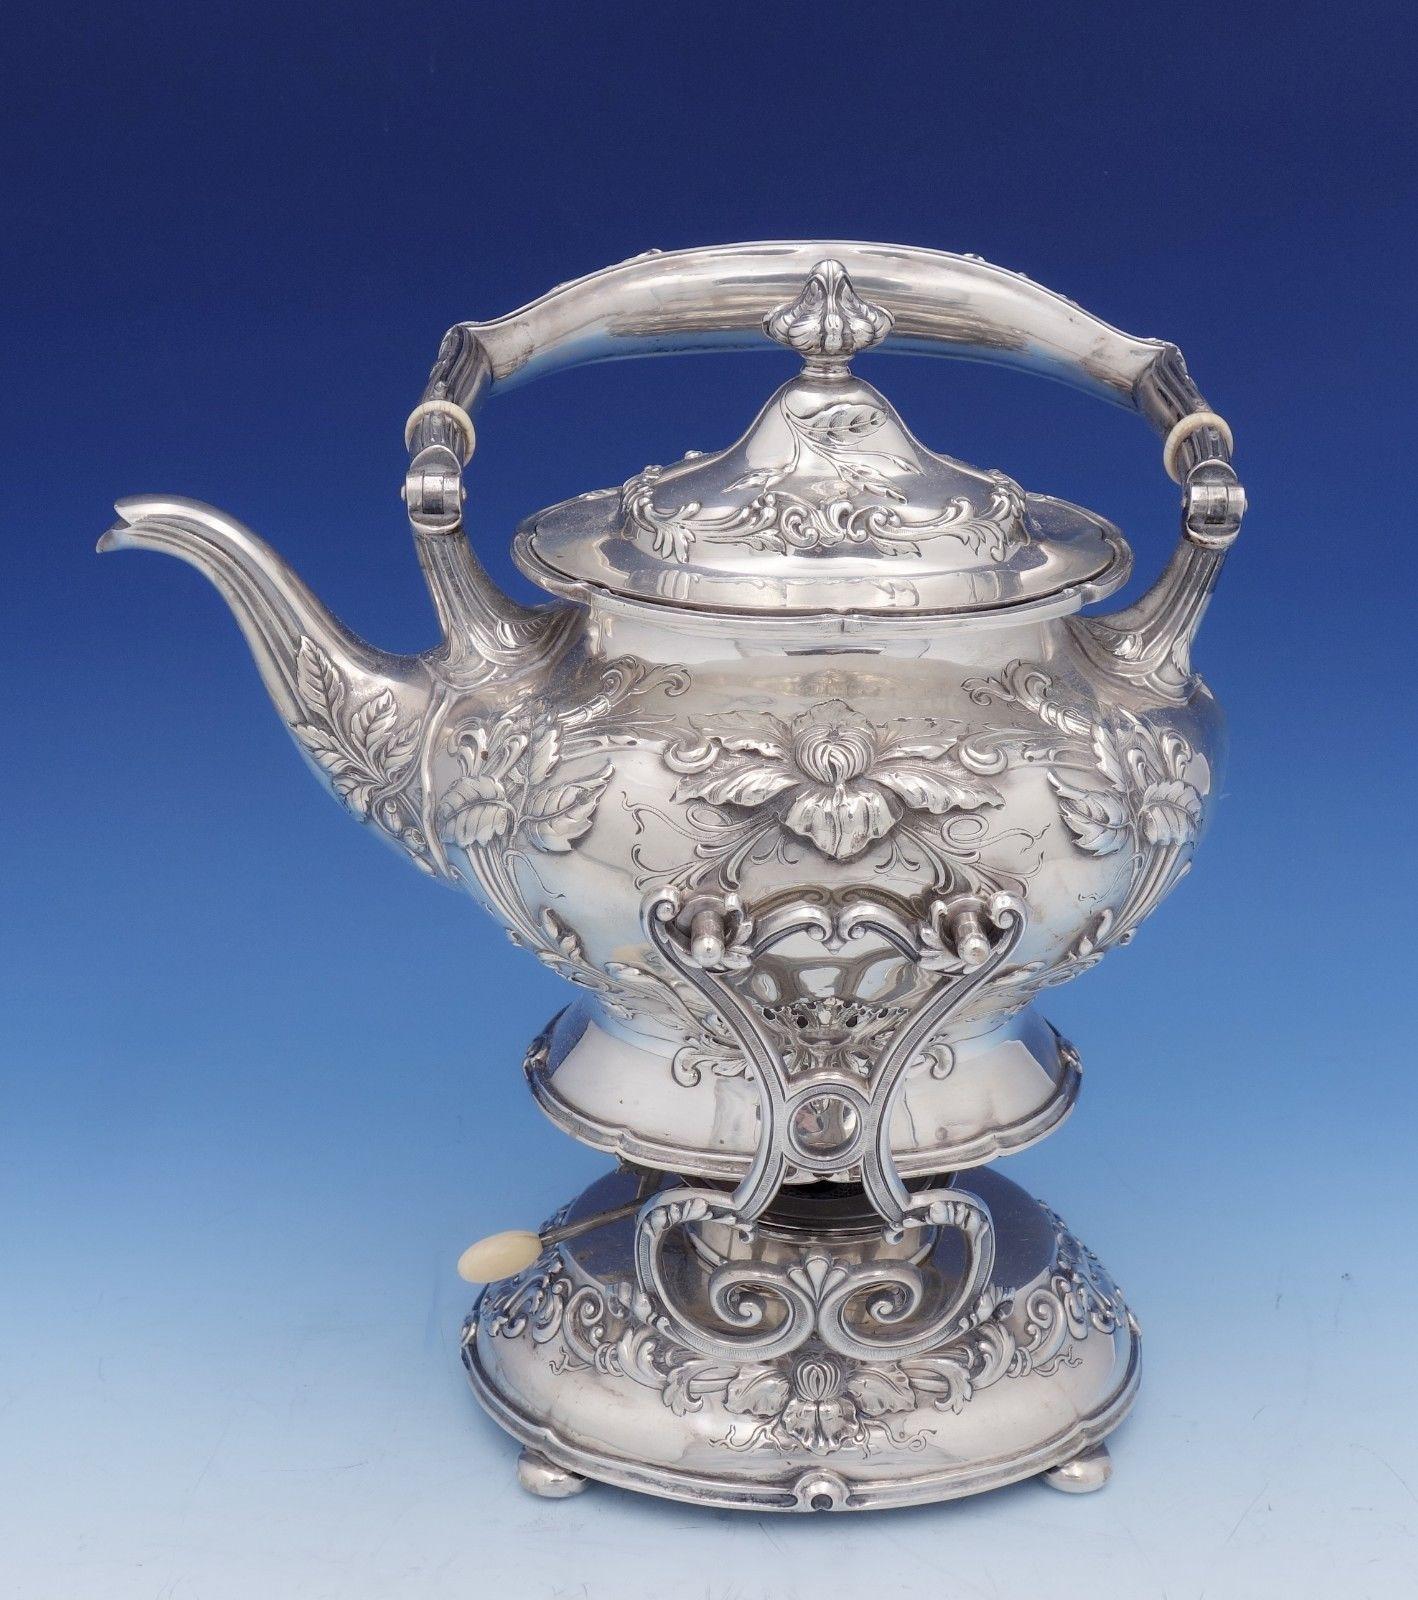 Gorgeous Imperial Chrysanthemum by Gorham sterling silver 6-piece tea set with fabulous chrysanthemum detailing.
This set includes:
1 - Kettle on stand: Marked #A7436, measures 9 1/4